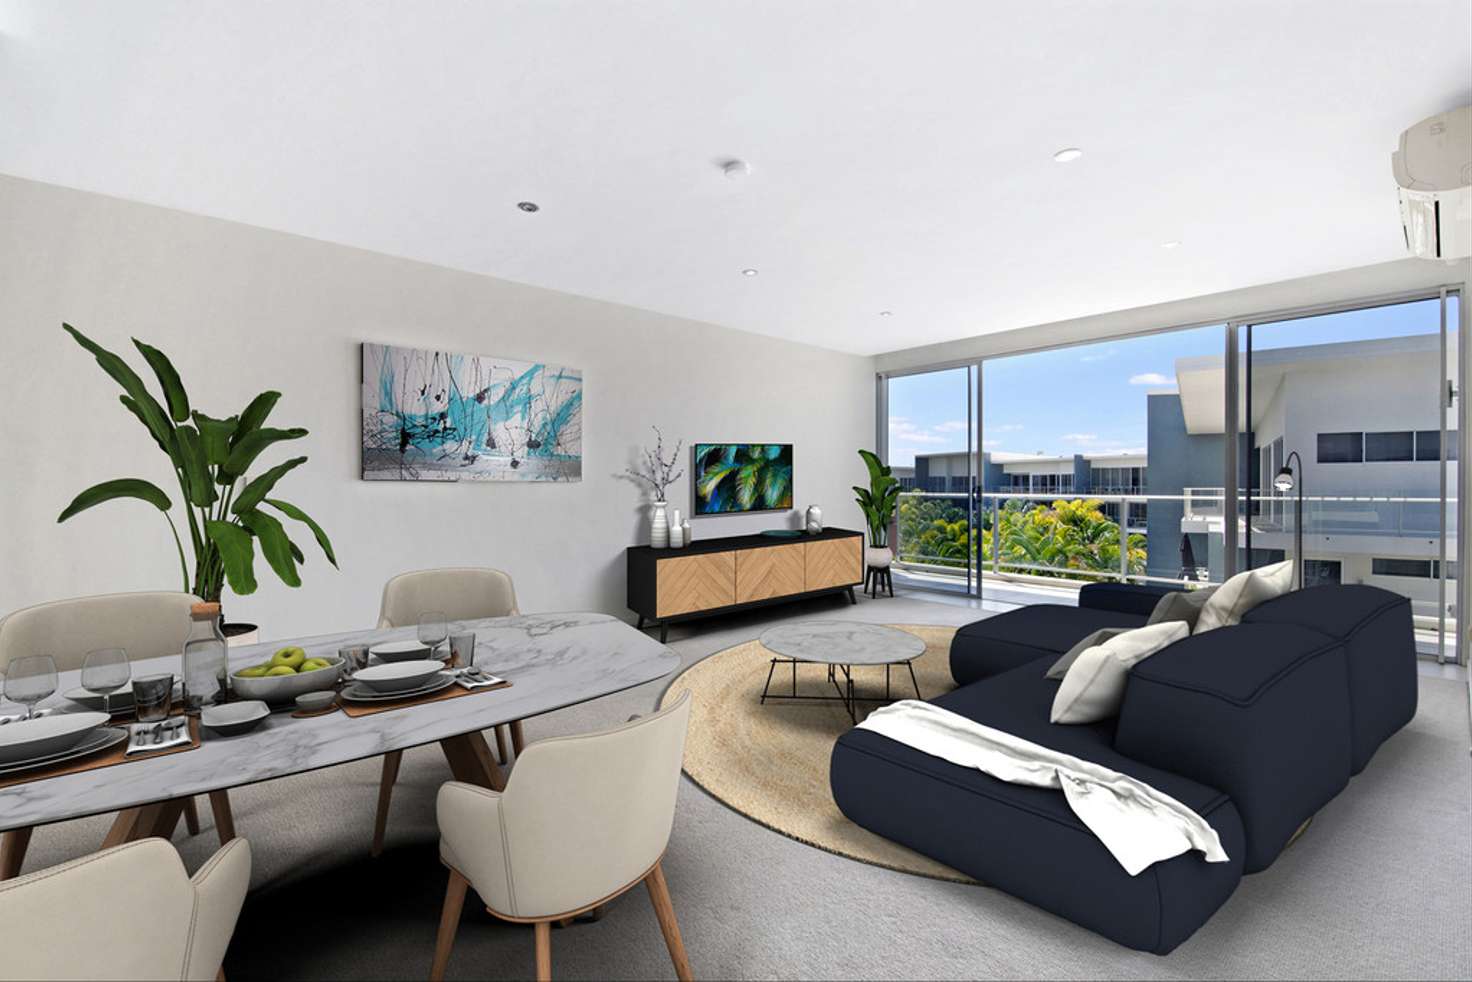 Main view of Homely house listing, 2408/2 Activa Way, Hope Island QLD 4212